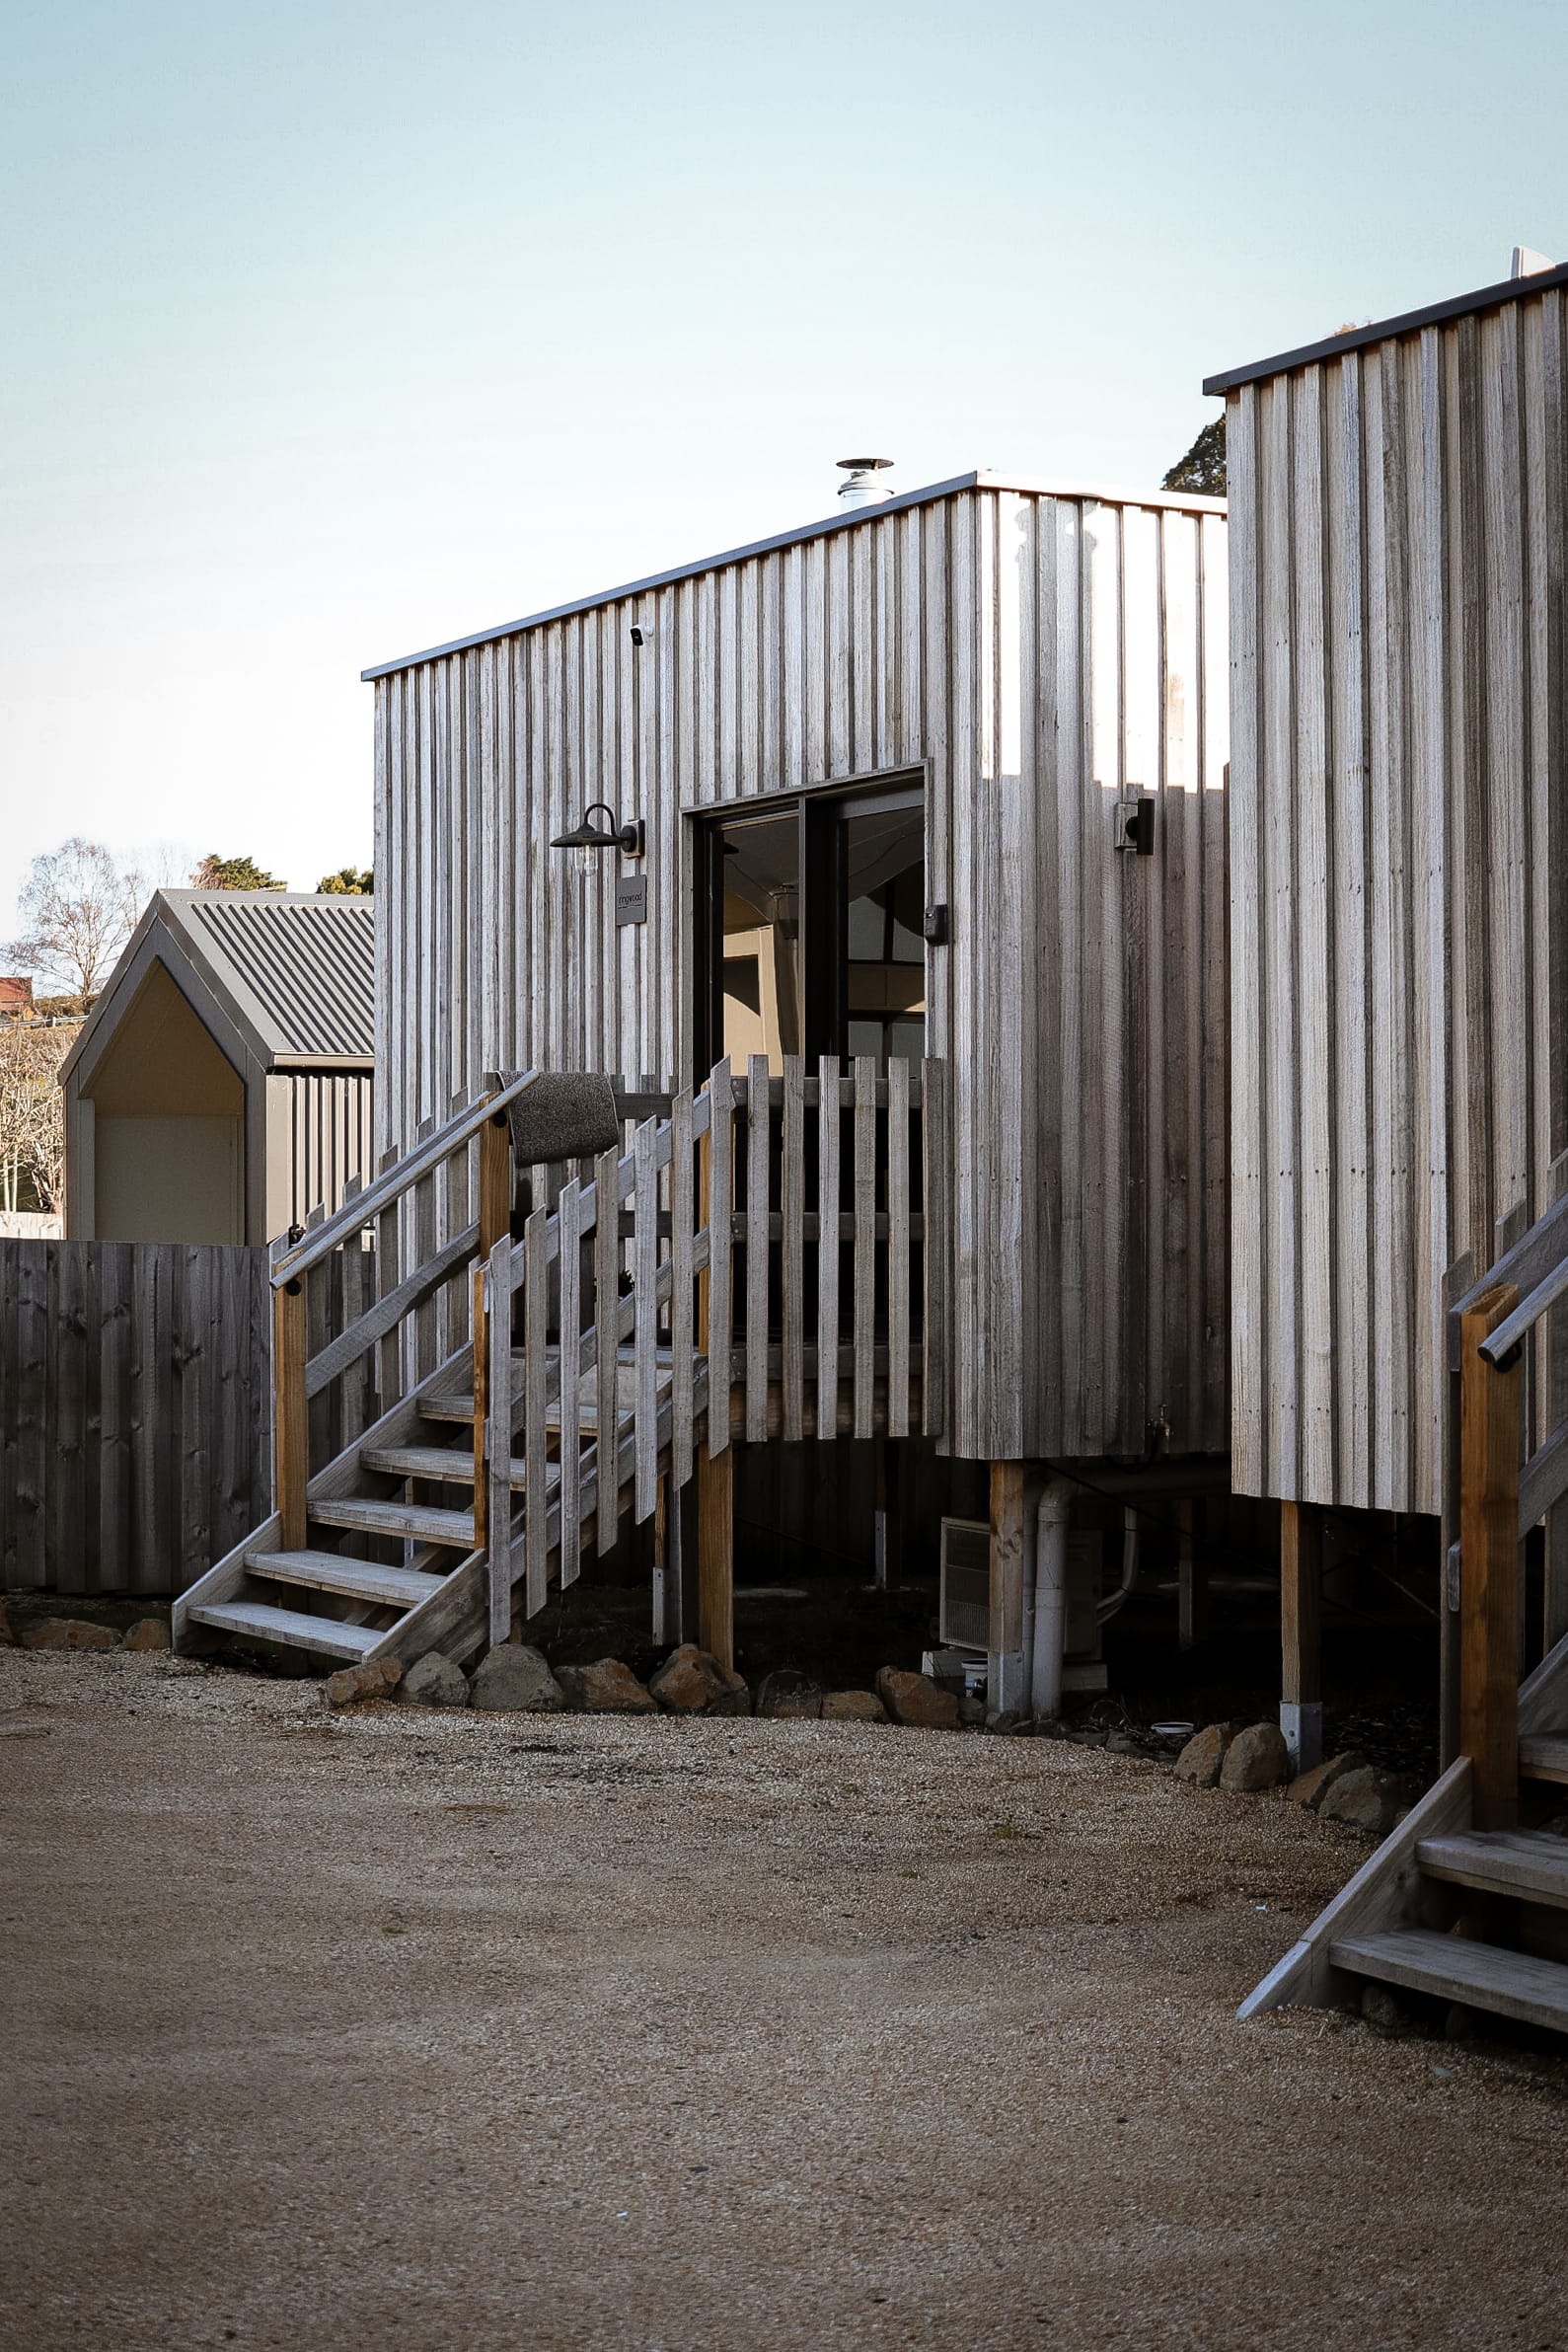 Just Down the Road. Photographer: Studio Winslow.  A modern wooden cabin with corrugated metal siding, featuring a stairway leading up to a deck with a door, set in a residential area with other houses nearby and a clear blue sky above.